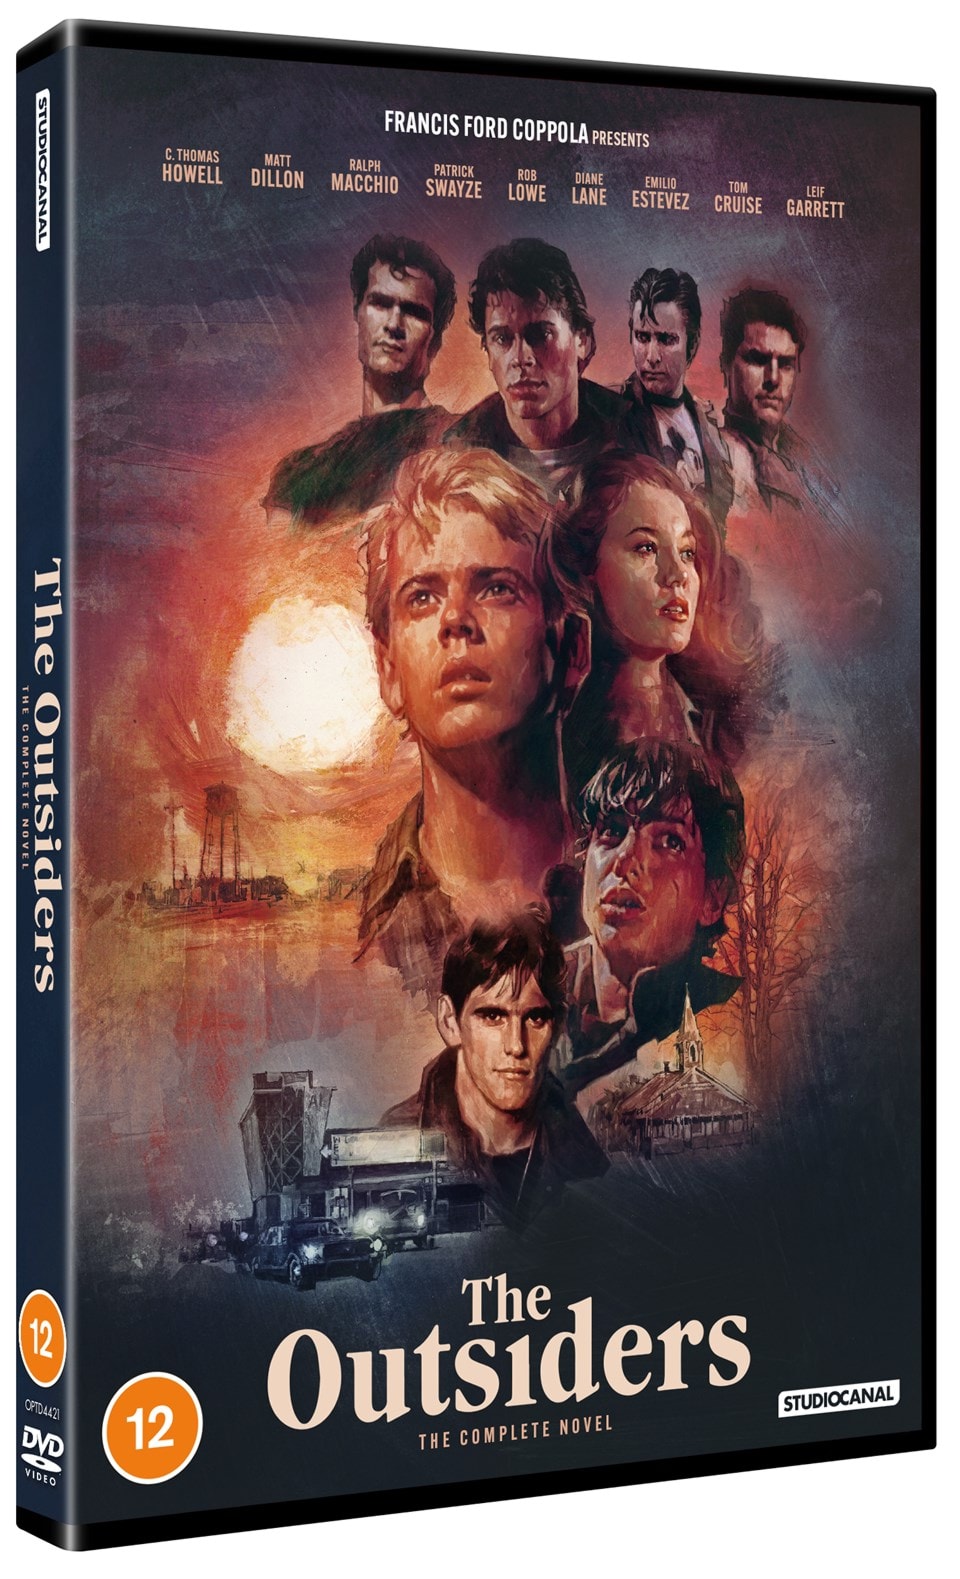 The Outsiders - The Complete Novel | DVD | Free shipping over £20 | HMV ...